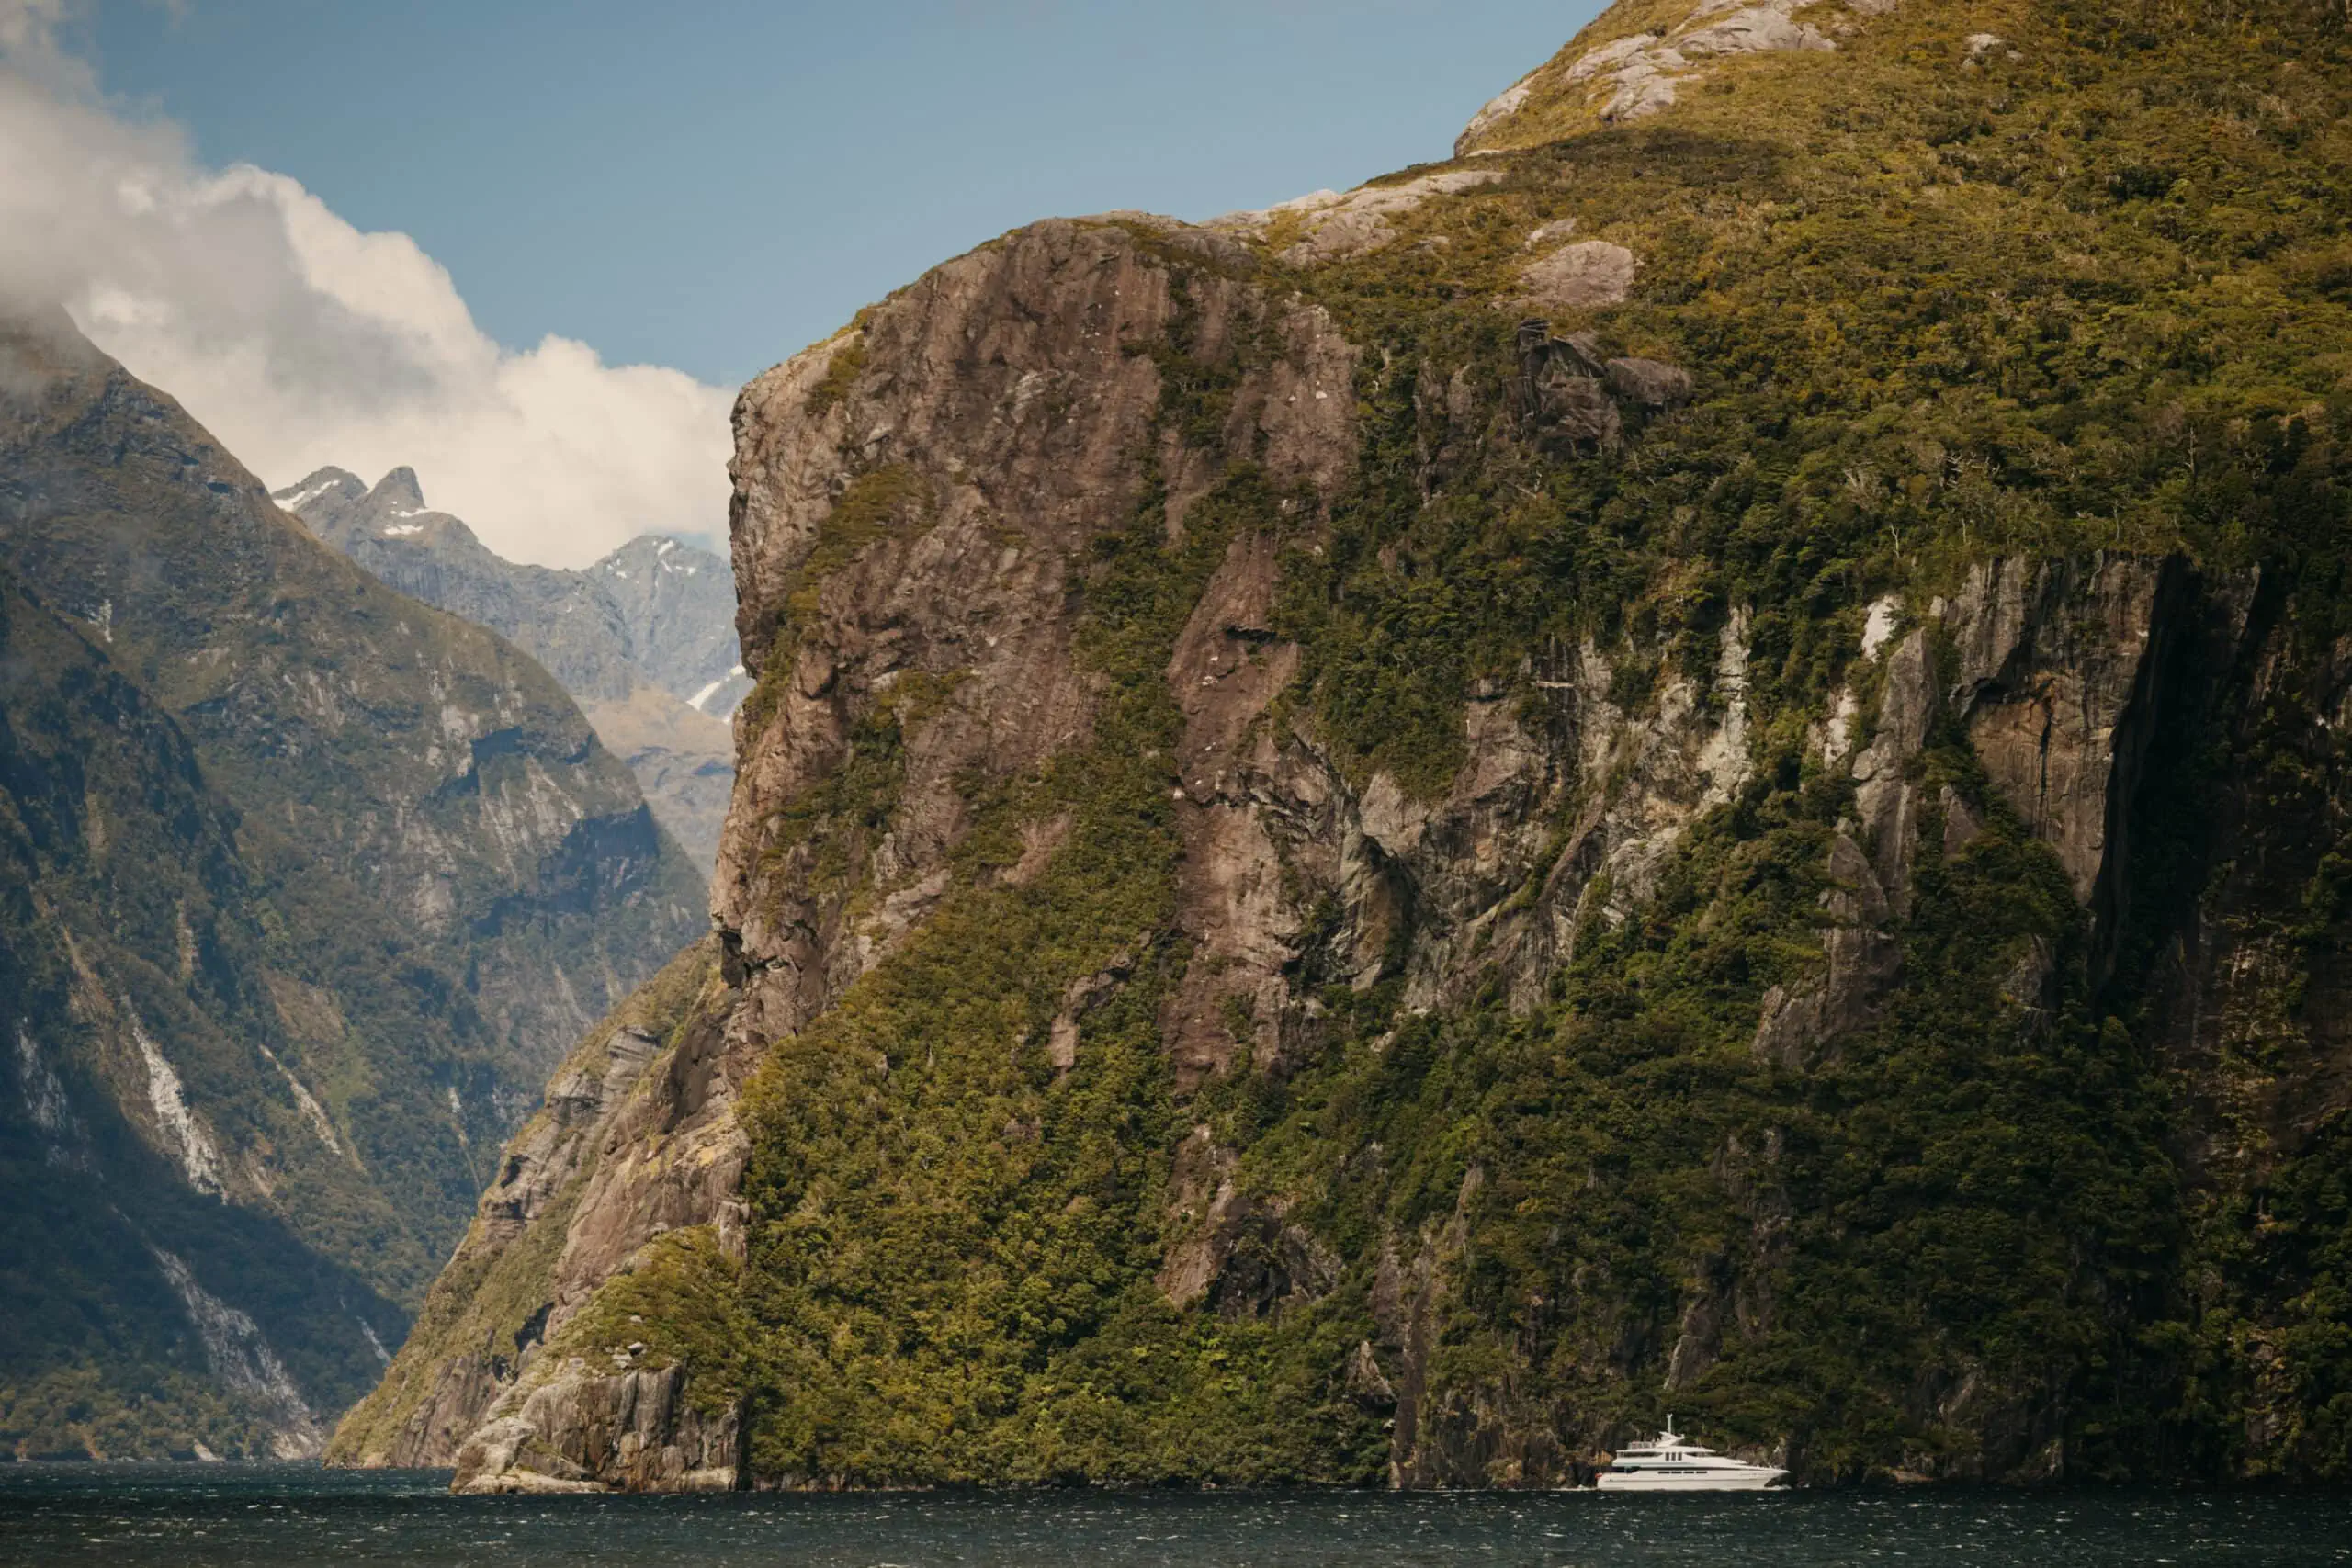 A photo of a mountain in Milford sound that resembles the shape of El Cap.